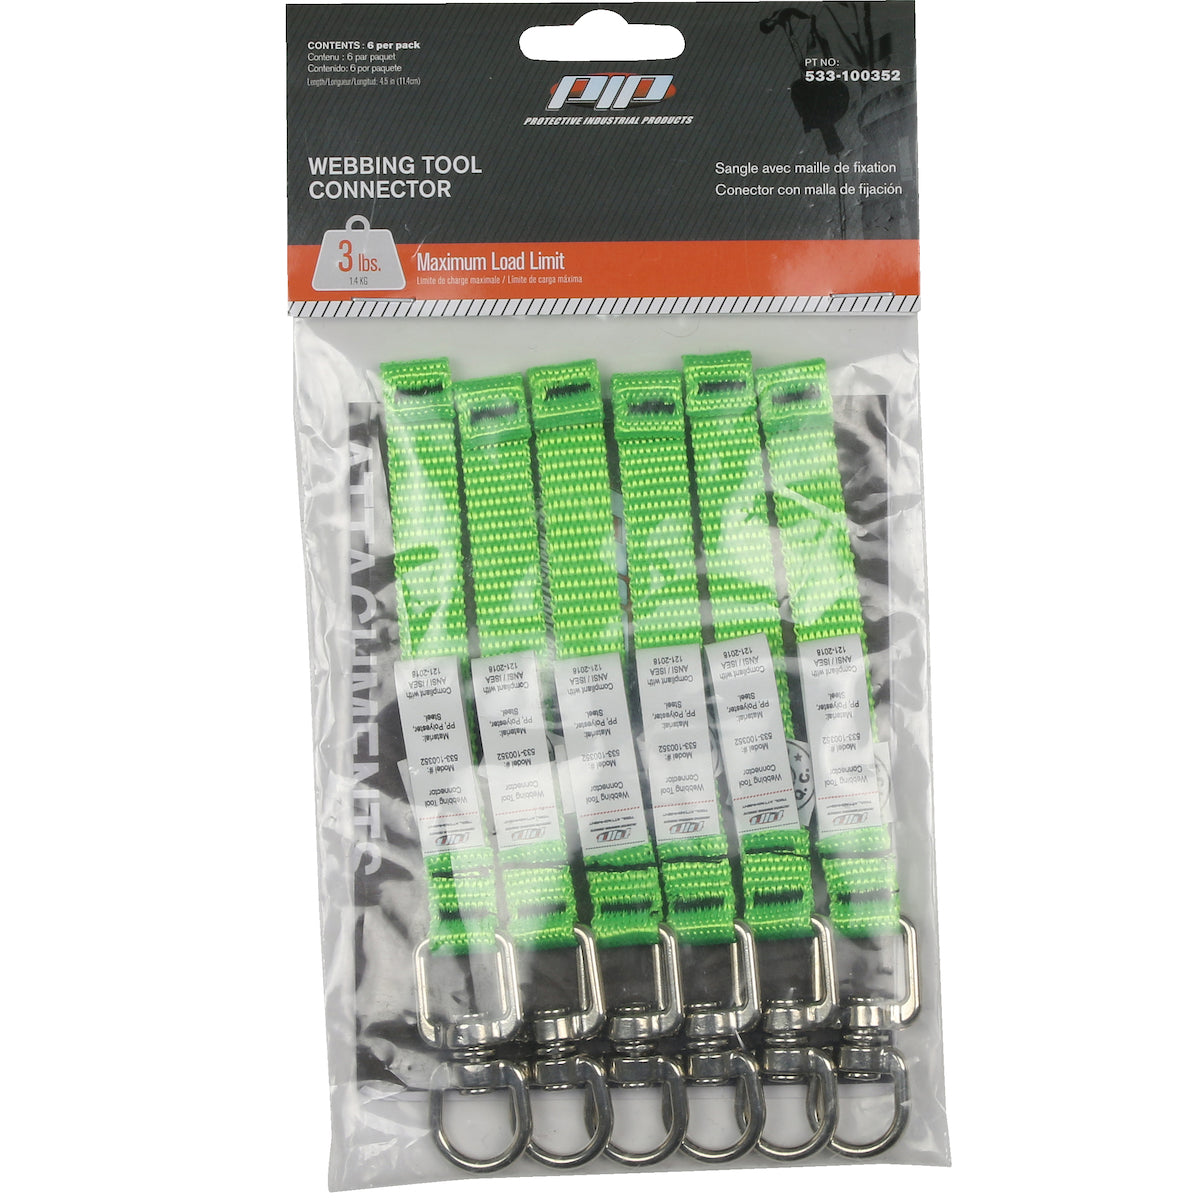 PIP 533-100352 Webbing Tool Connector 4.5" - 3 lbs. maximum load limit - Retail Packaged